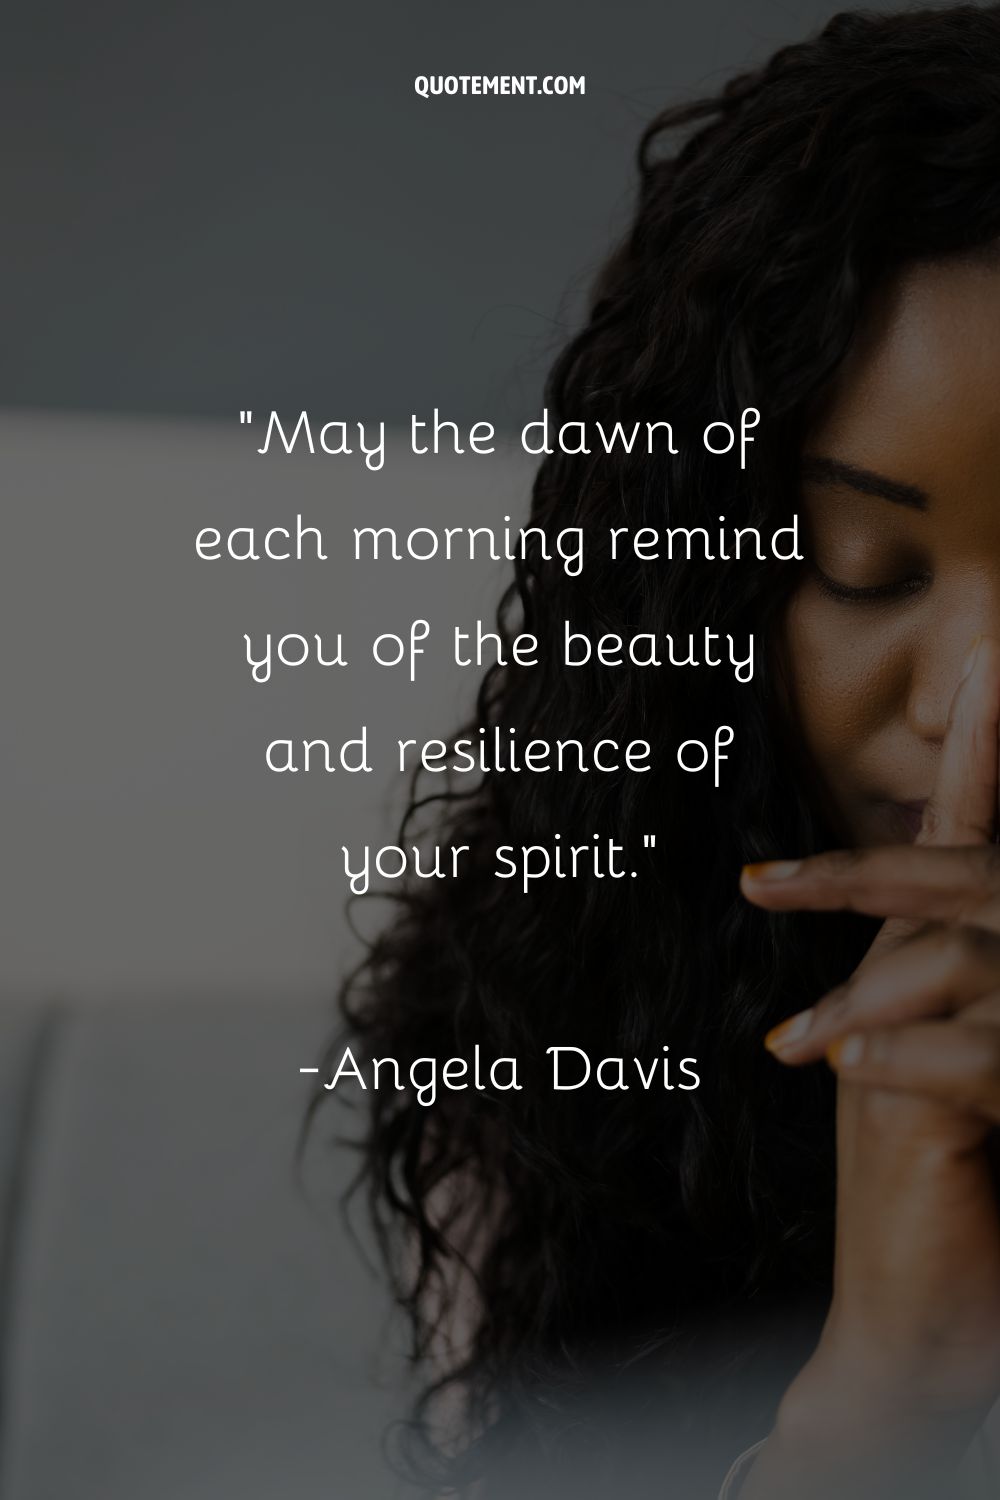 May the dawn of each morning remind you of the beauty and resilience of your spirit.